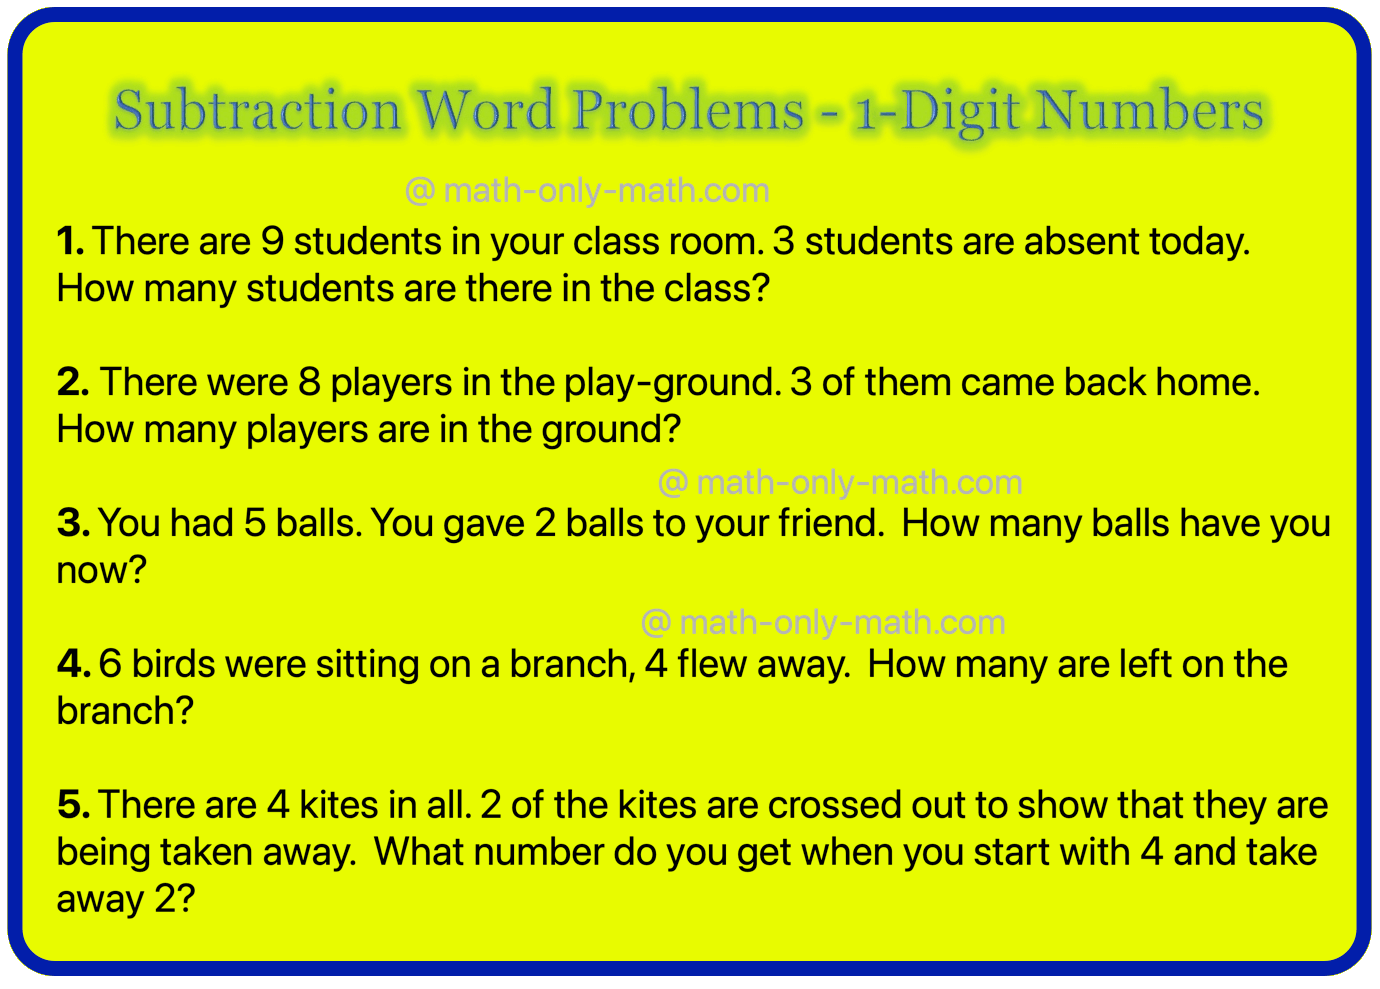 Math basic concept on subtraction word problems - 1-digit numbers for the first grade. To understand the word problems with different digits combinations read the question carefully and follow 